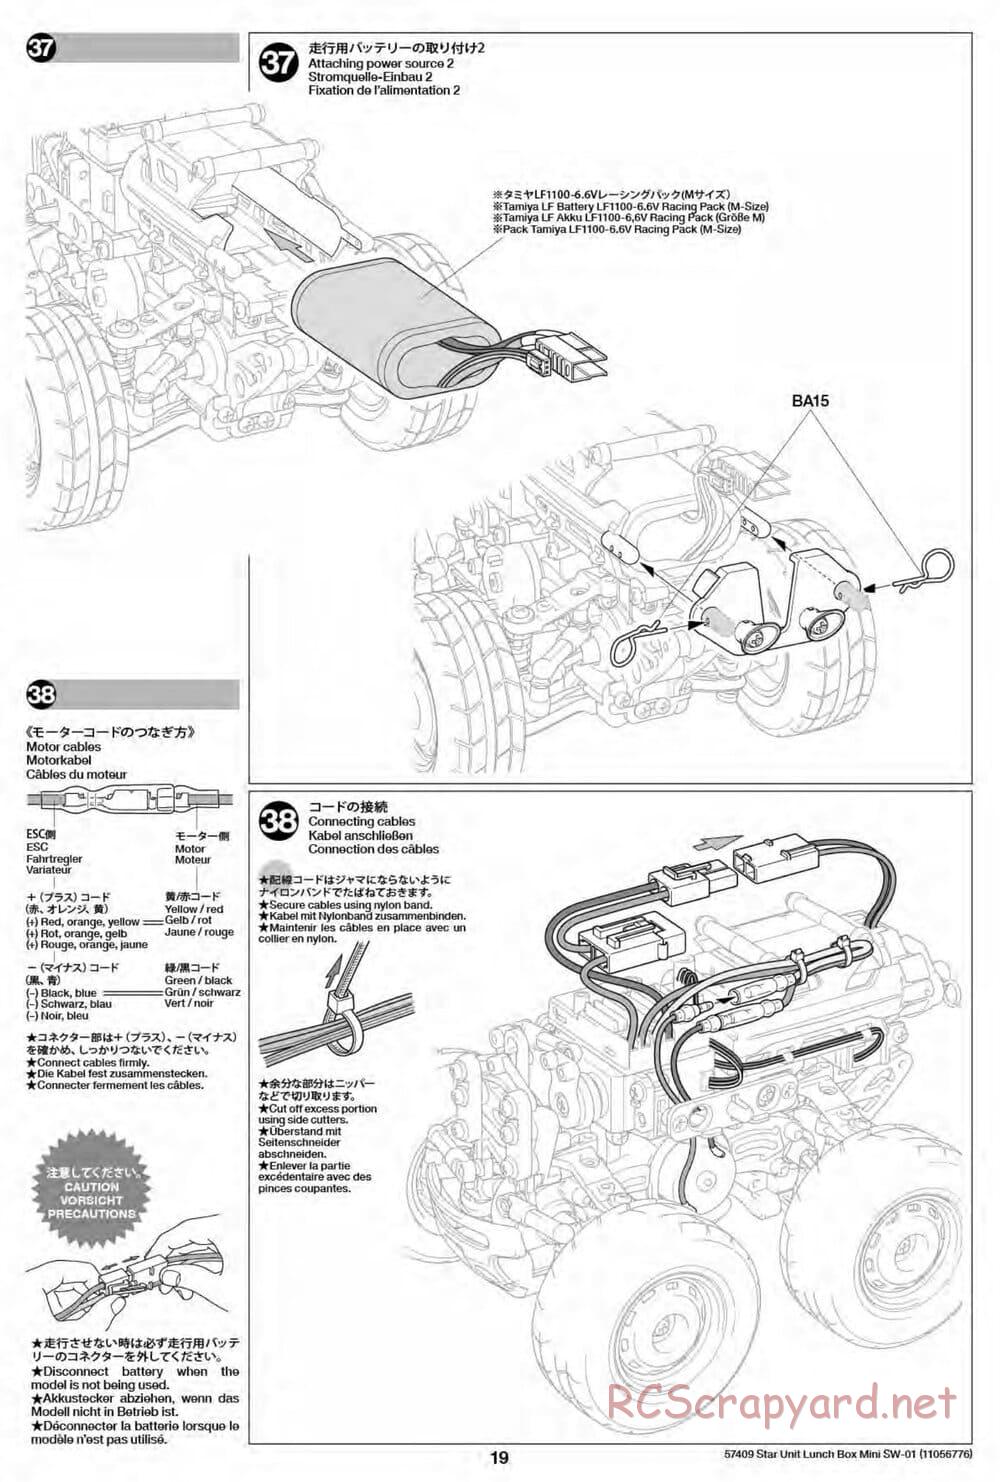 Tamiya - Lunch Box Mini - SW-01 Chassis - Manual - Page 19